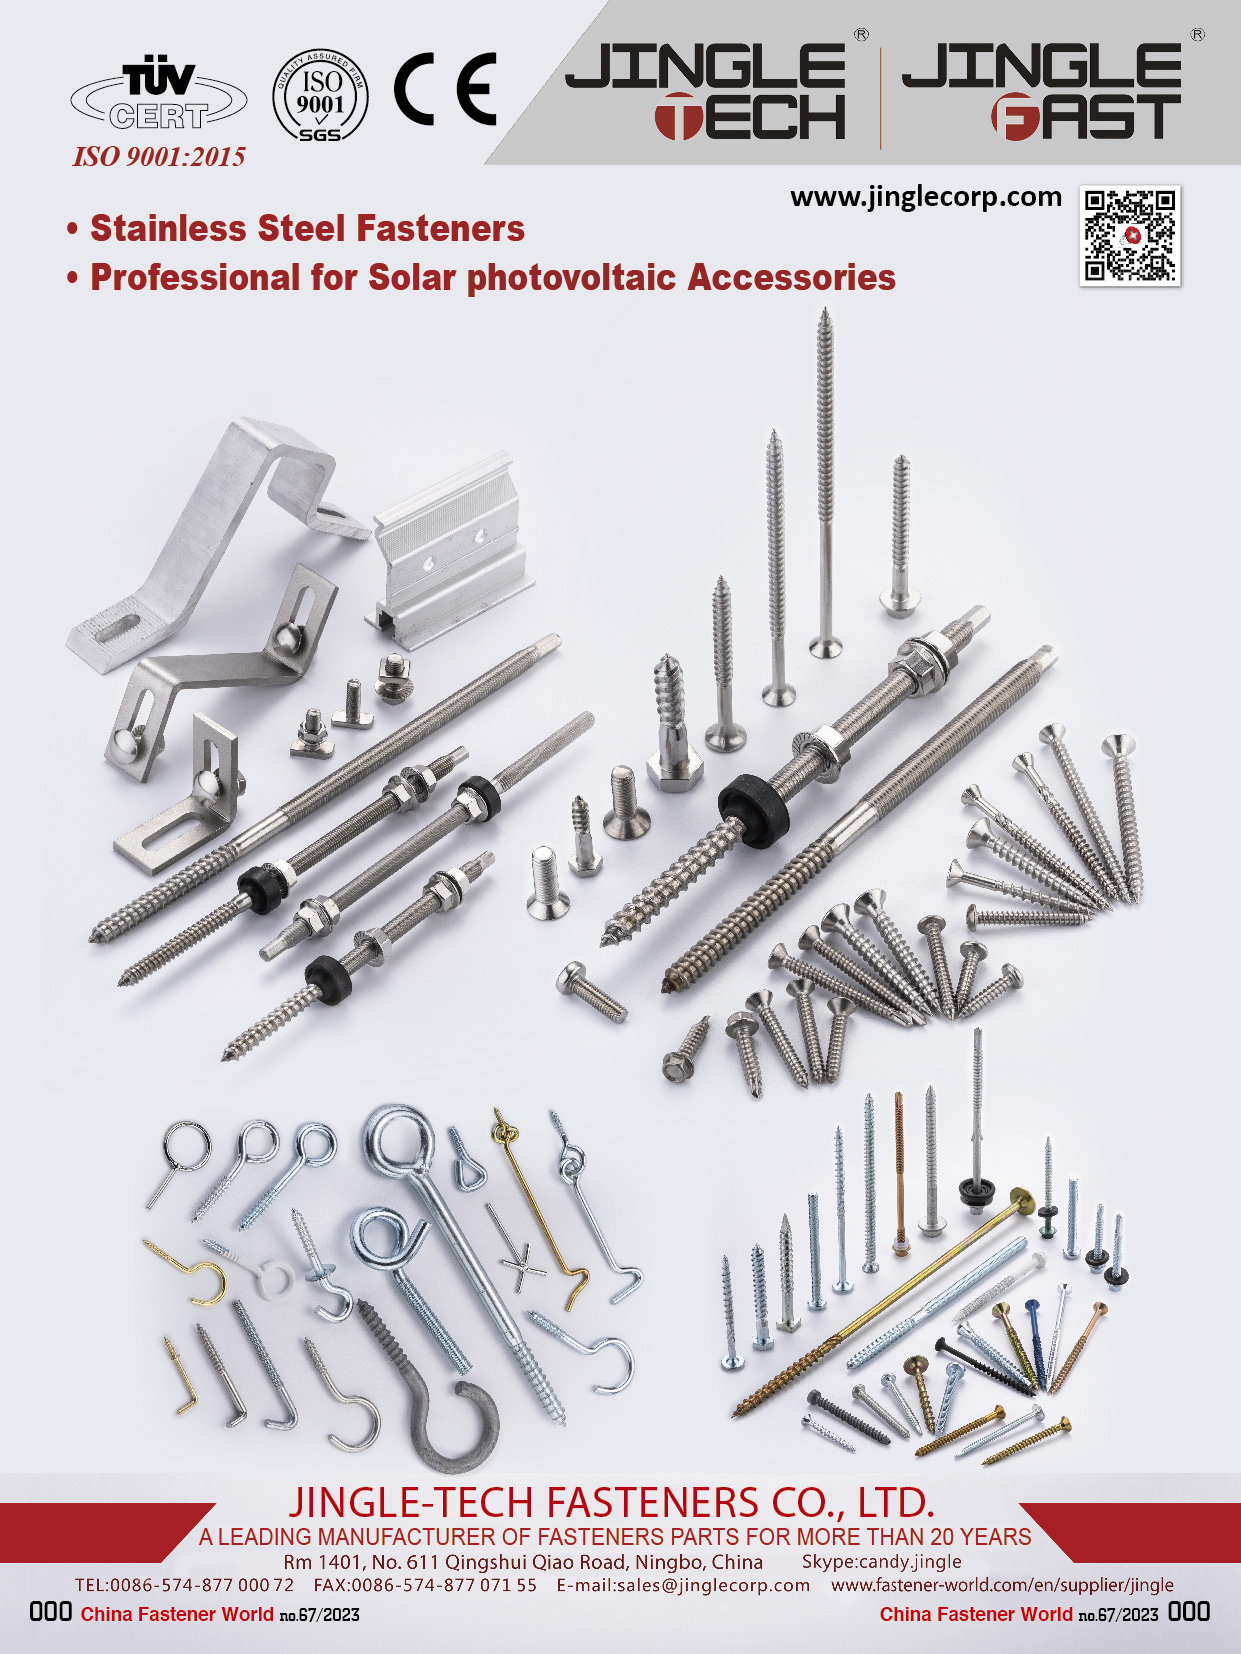 JINGLE-TECH FASTENERS CO., LTD. , Stainless Steel Fasteners, Professional for Solar Photovoltaic Accessories , Non-standard Hexagon Head Screws / Bolts